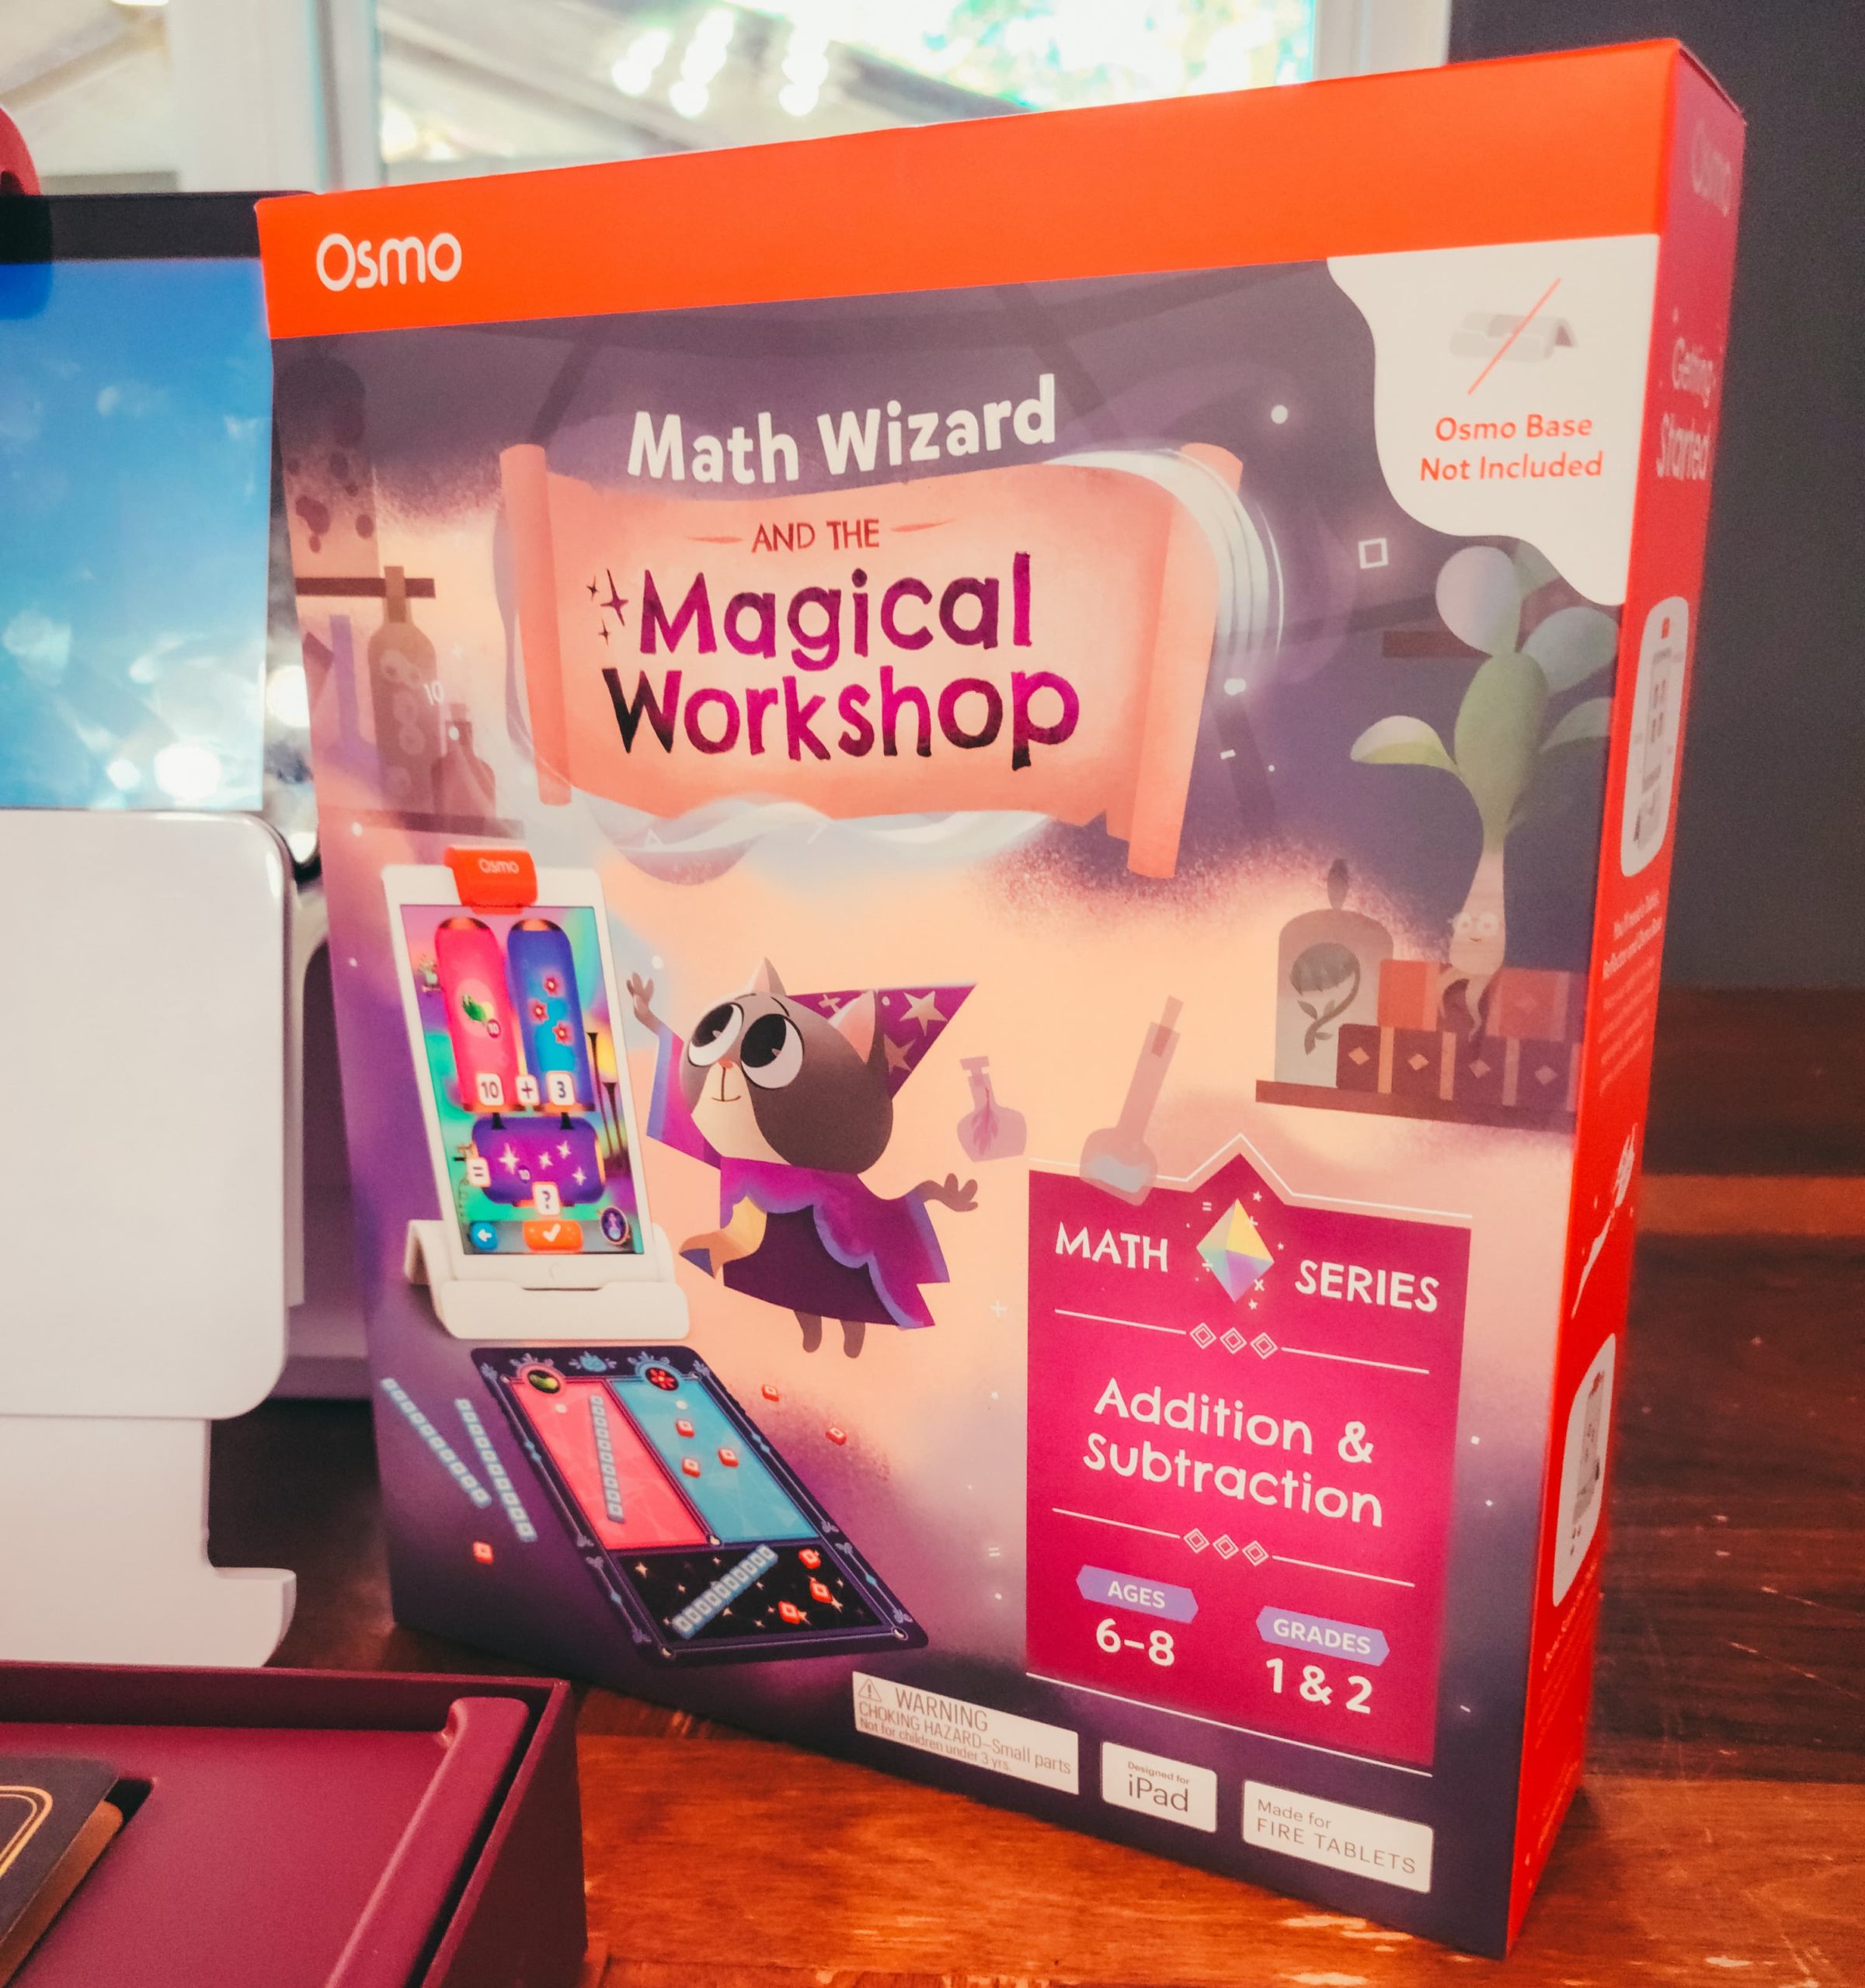 Magical Workshop Math Wizard: Play Osmo Review